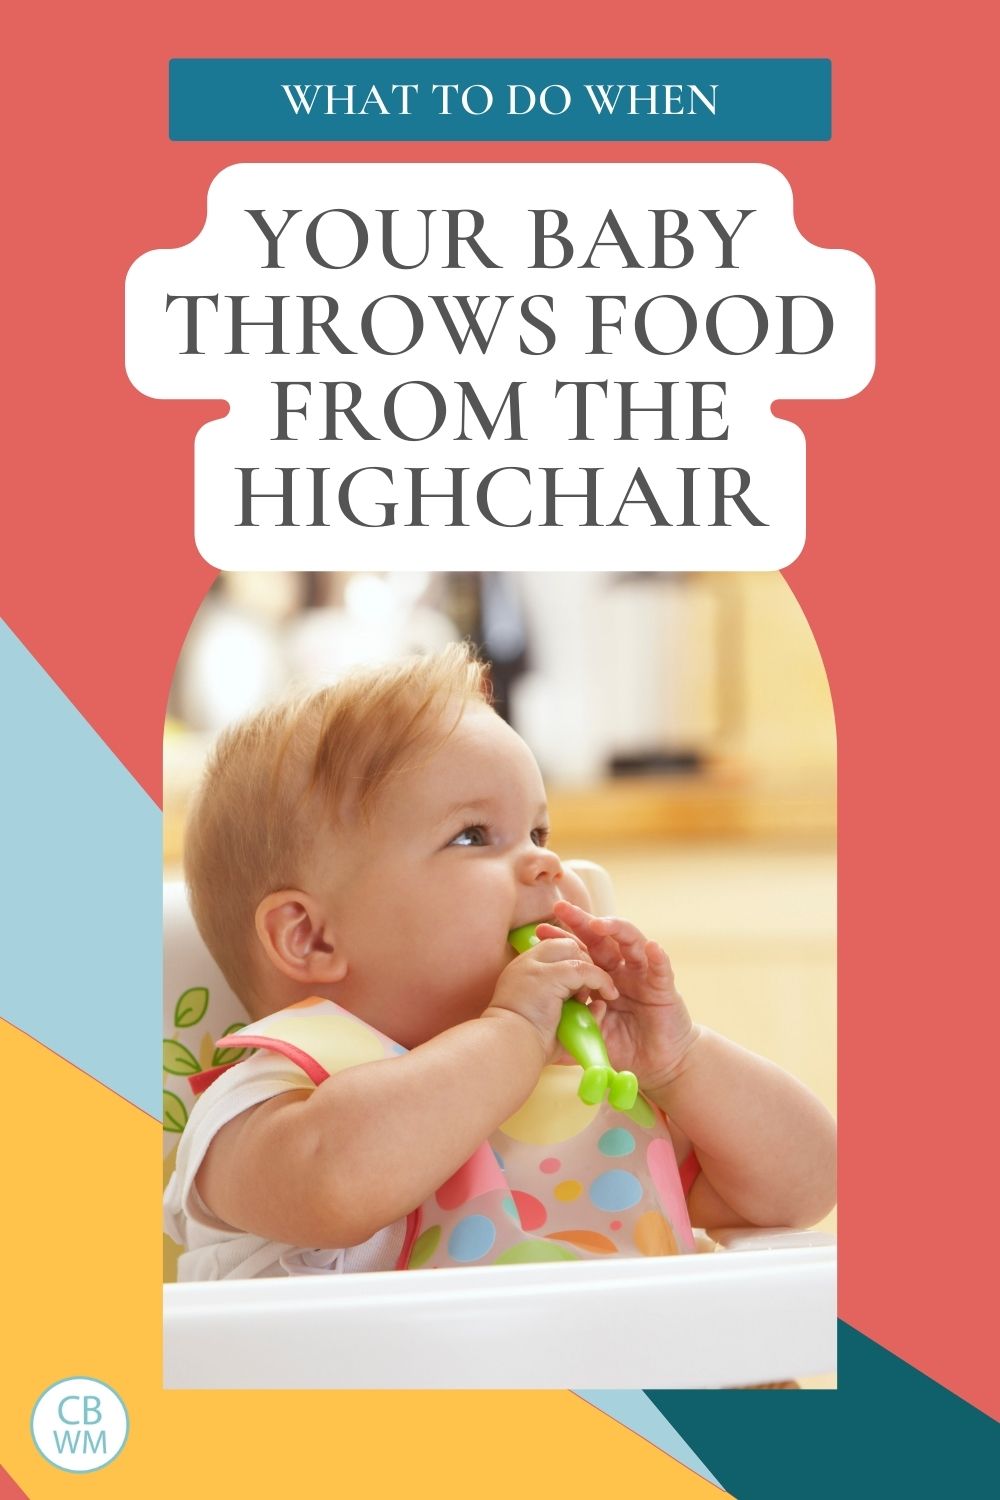 Baby throws food from high chair